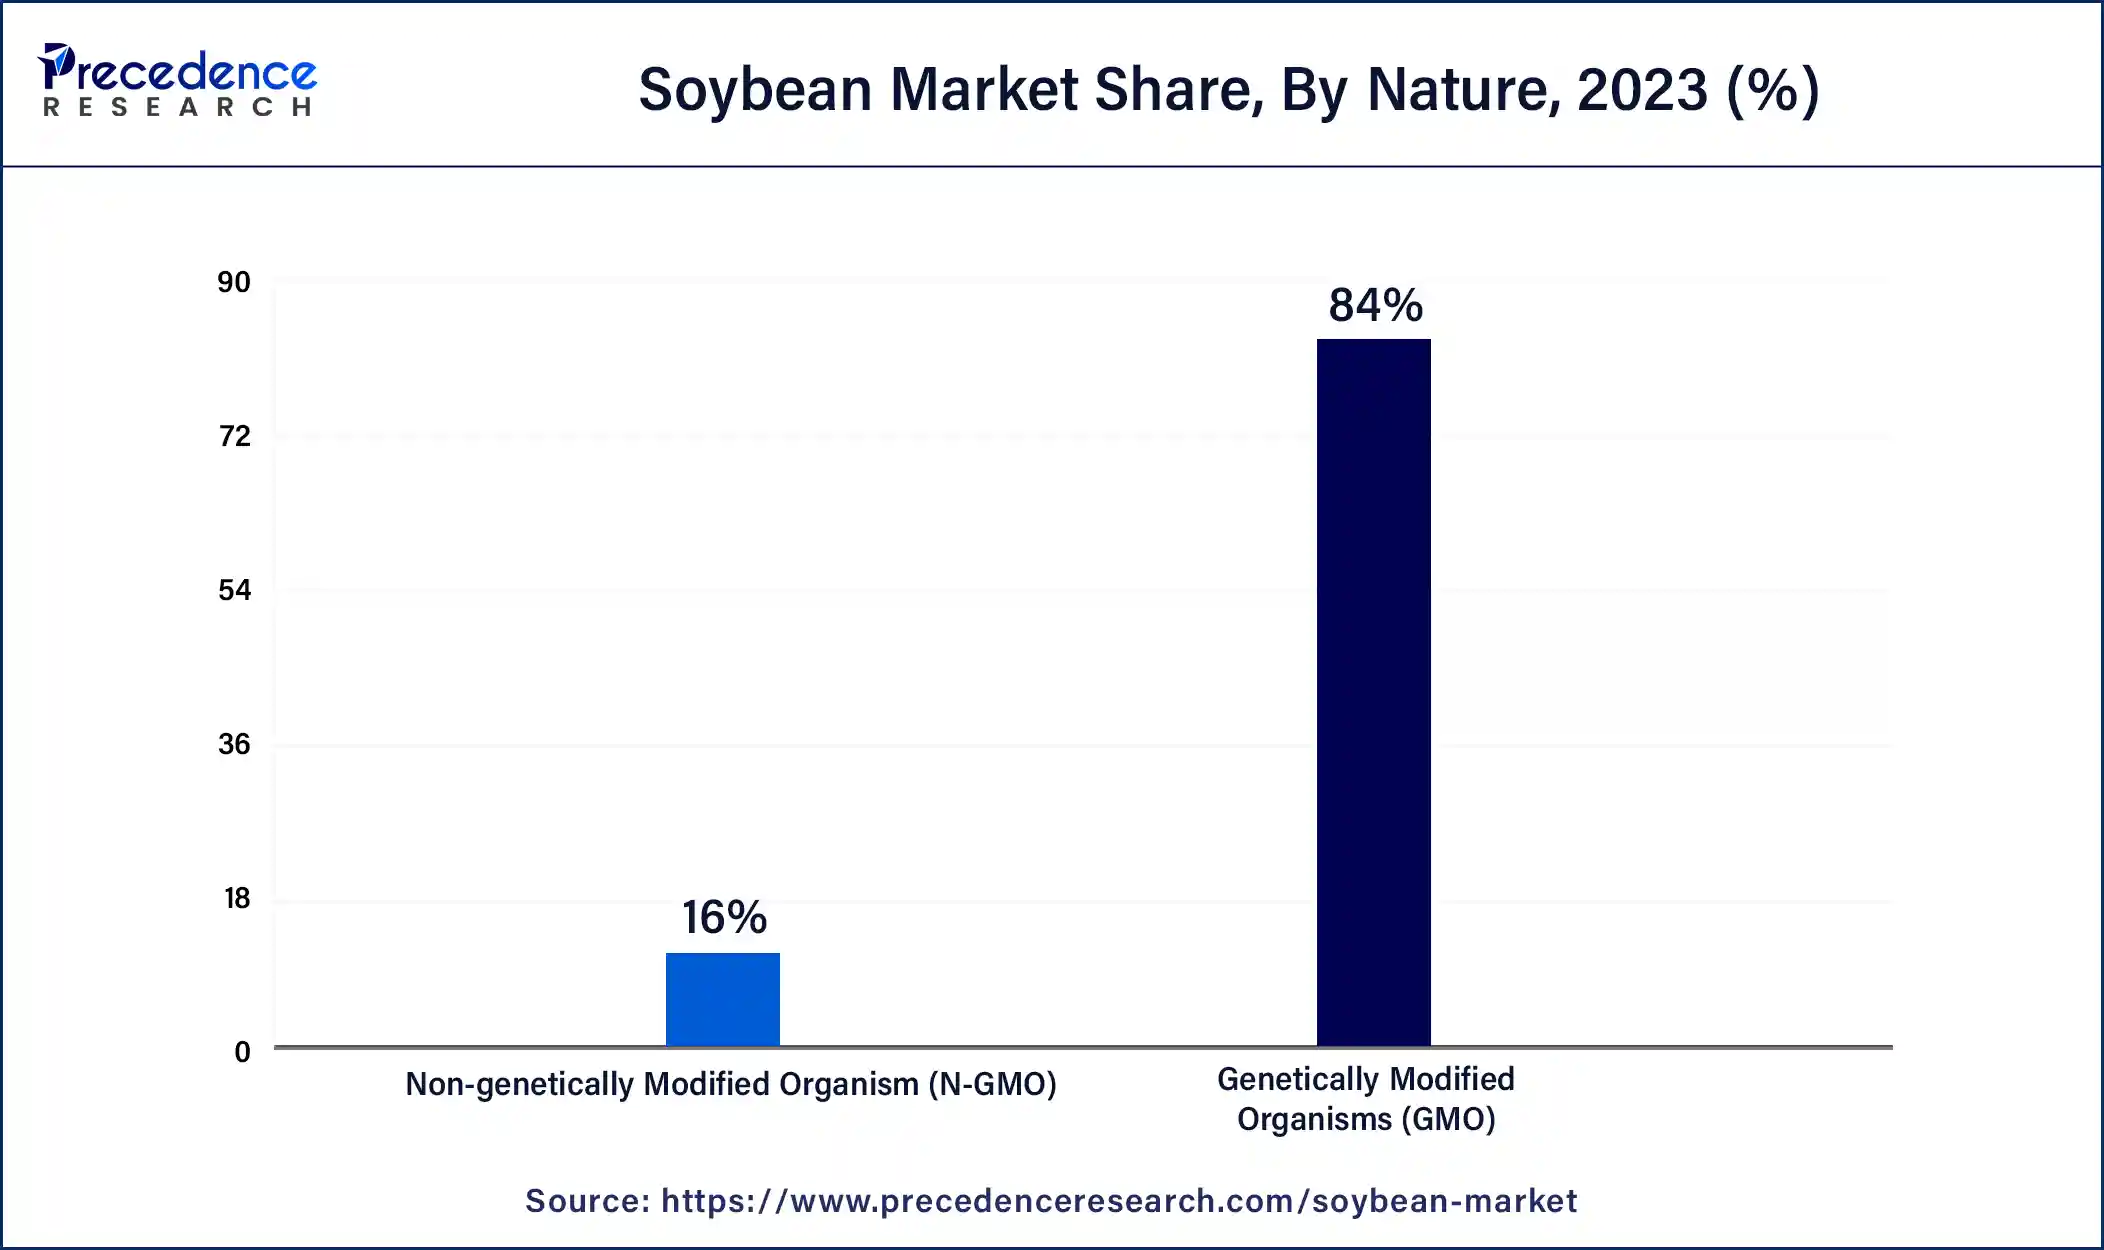 Soyabean Market Share, By Nature, 2023 (%)